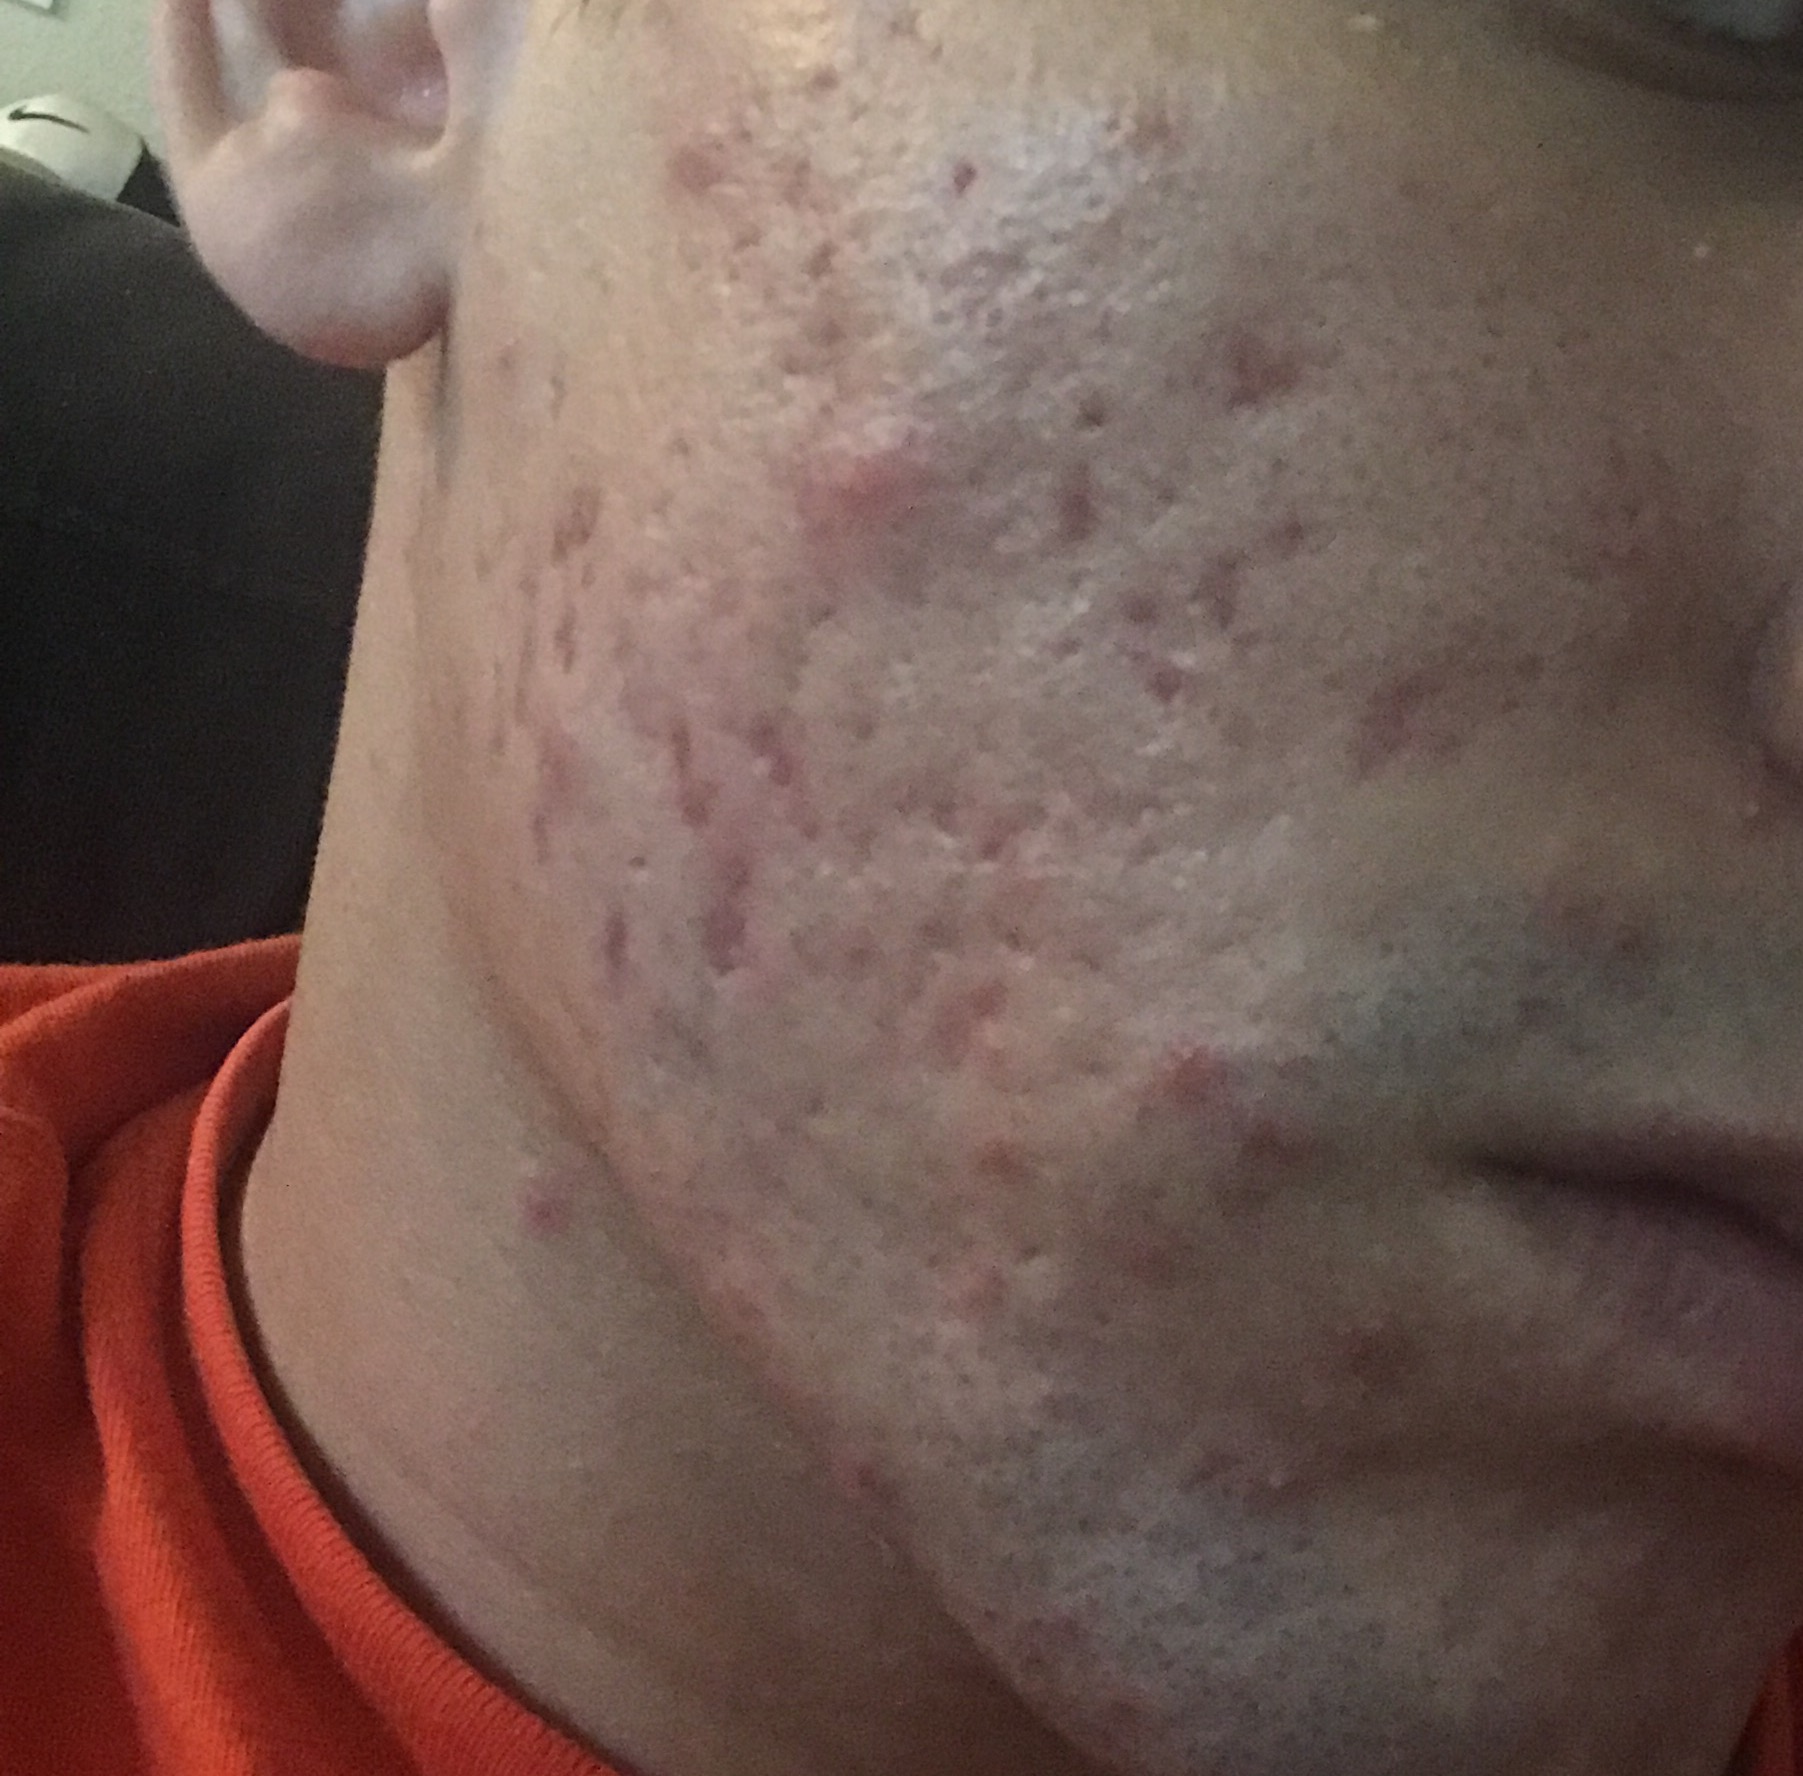 Need help with acne/scars ! - Scar treatments - Acne.org Community